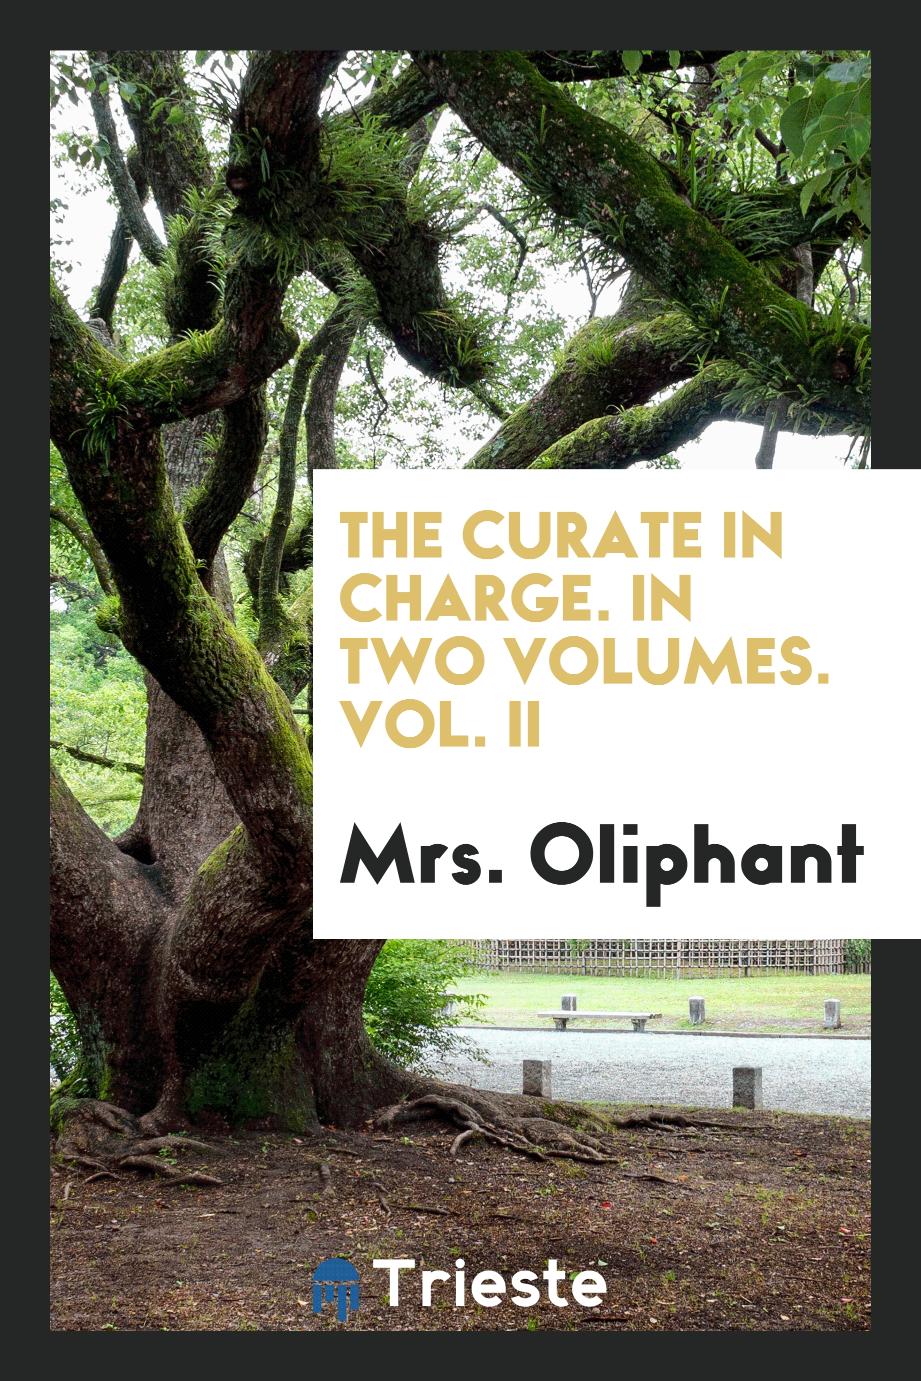 The Curate in Charge. In Two Volumes. Vol. II